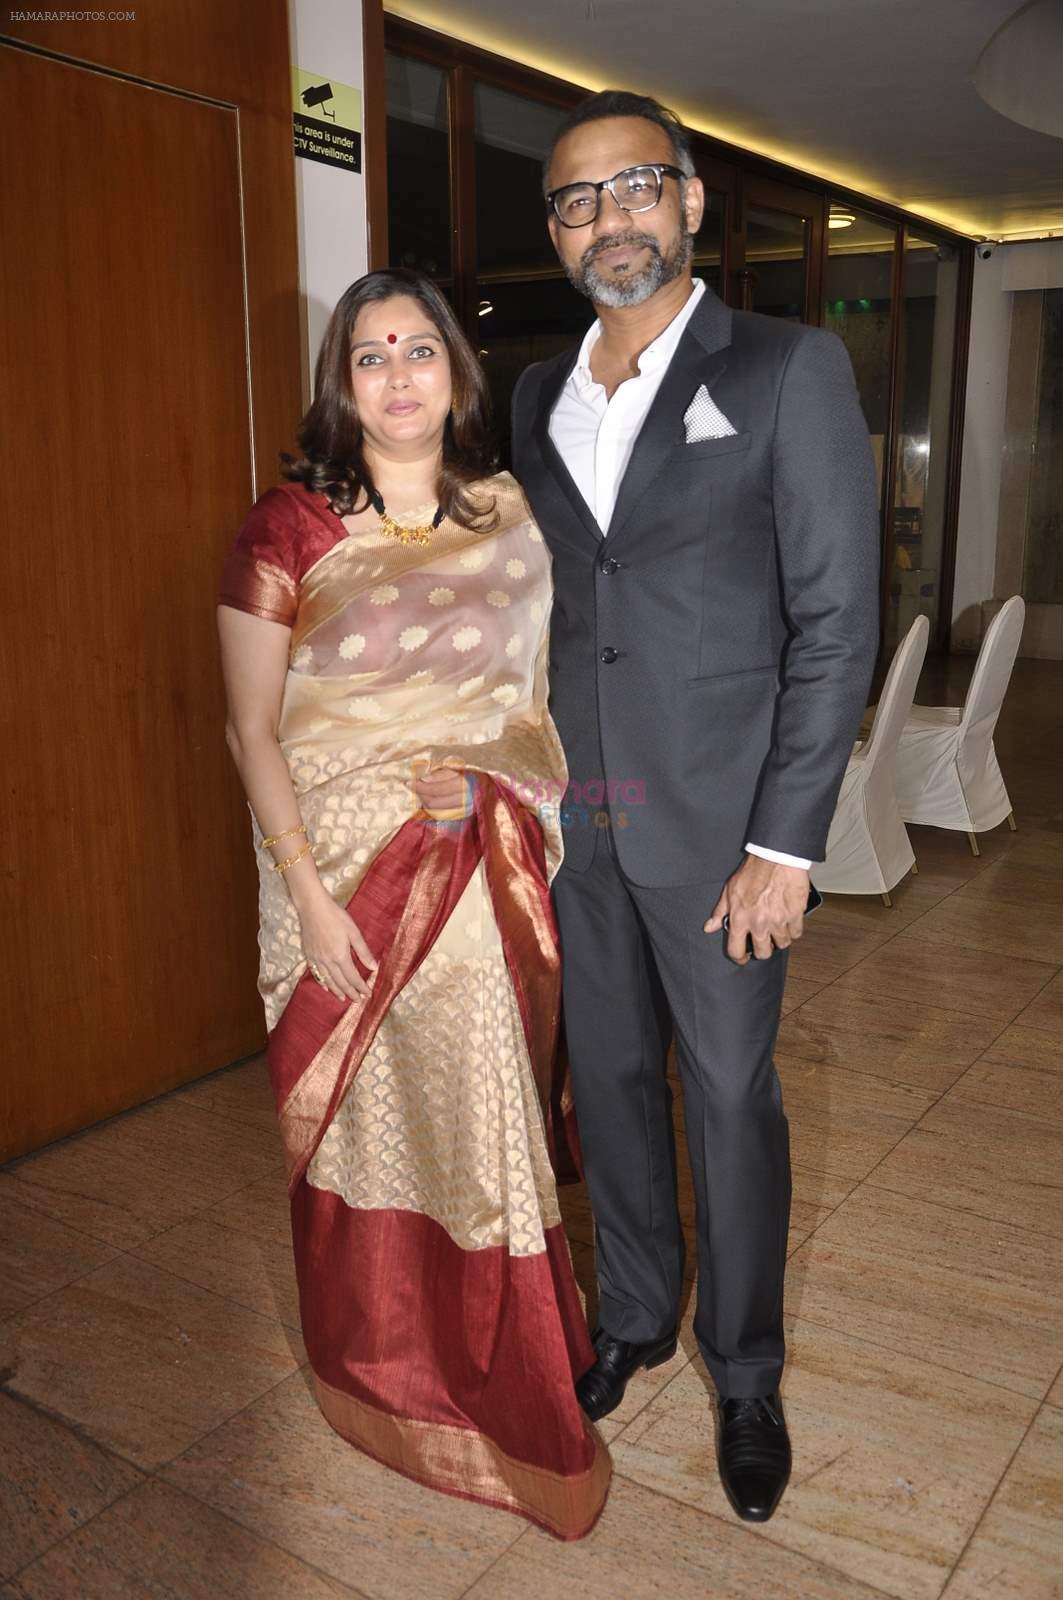 Abhinay Deo at the launch of Resovilla in association with Disha Direct and Abhinay Deo in The Club on 2nd March 2015